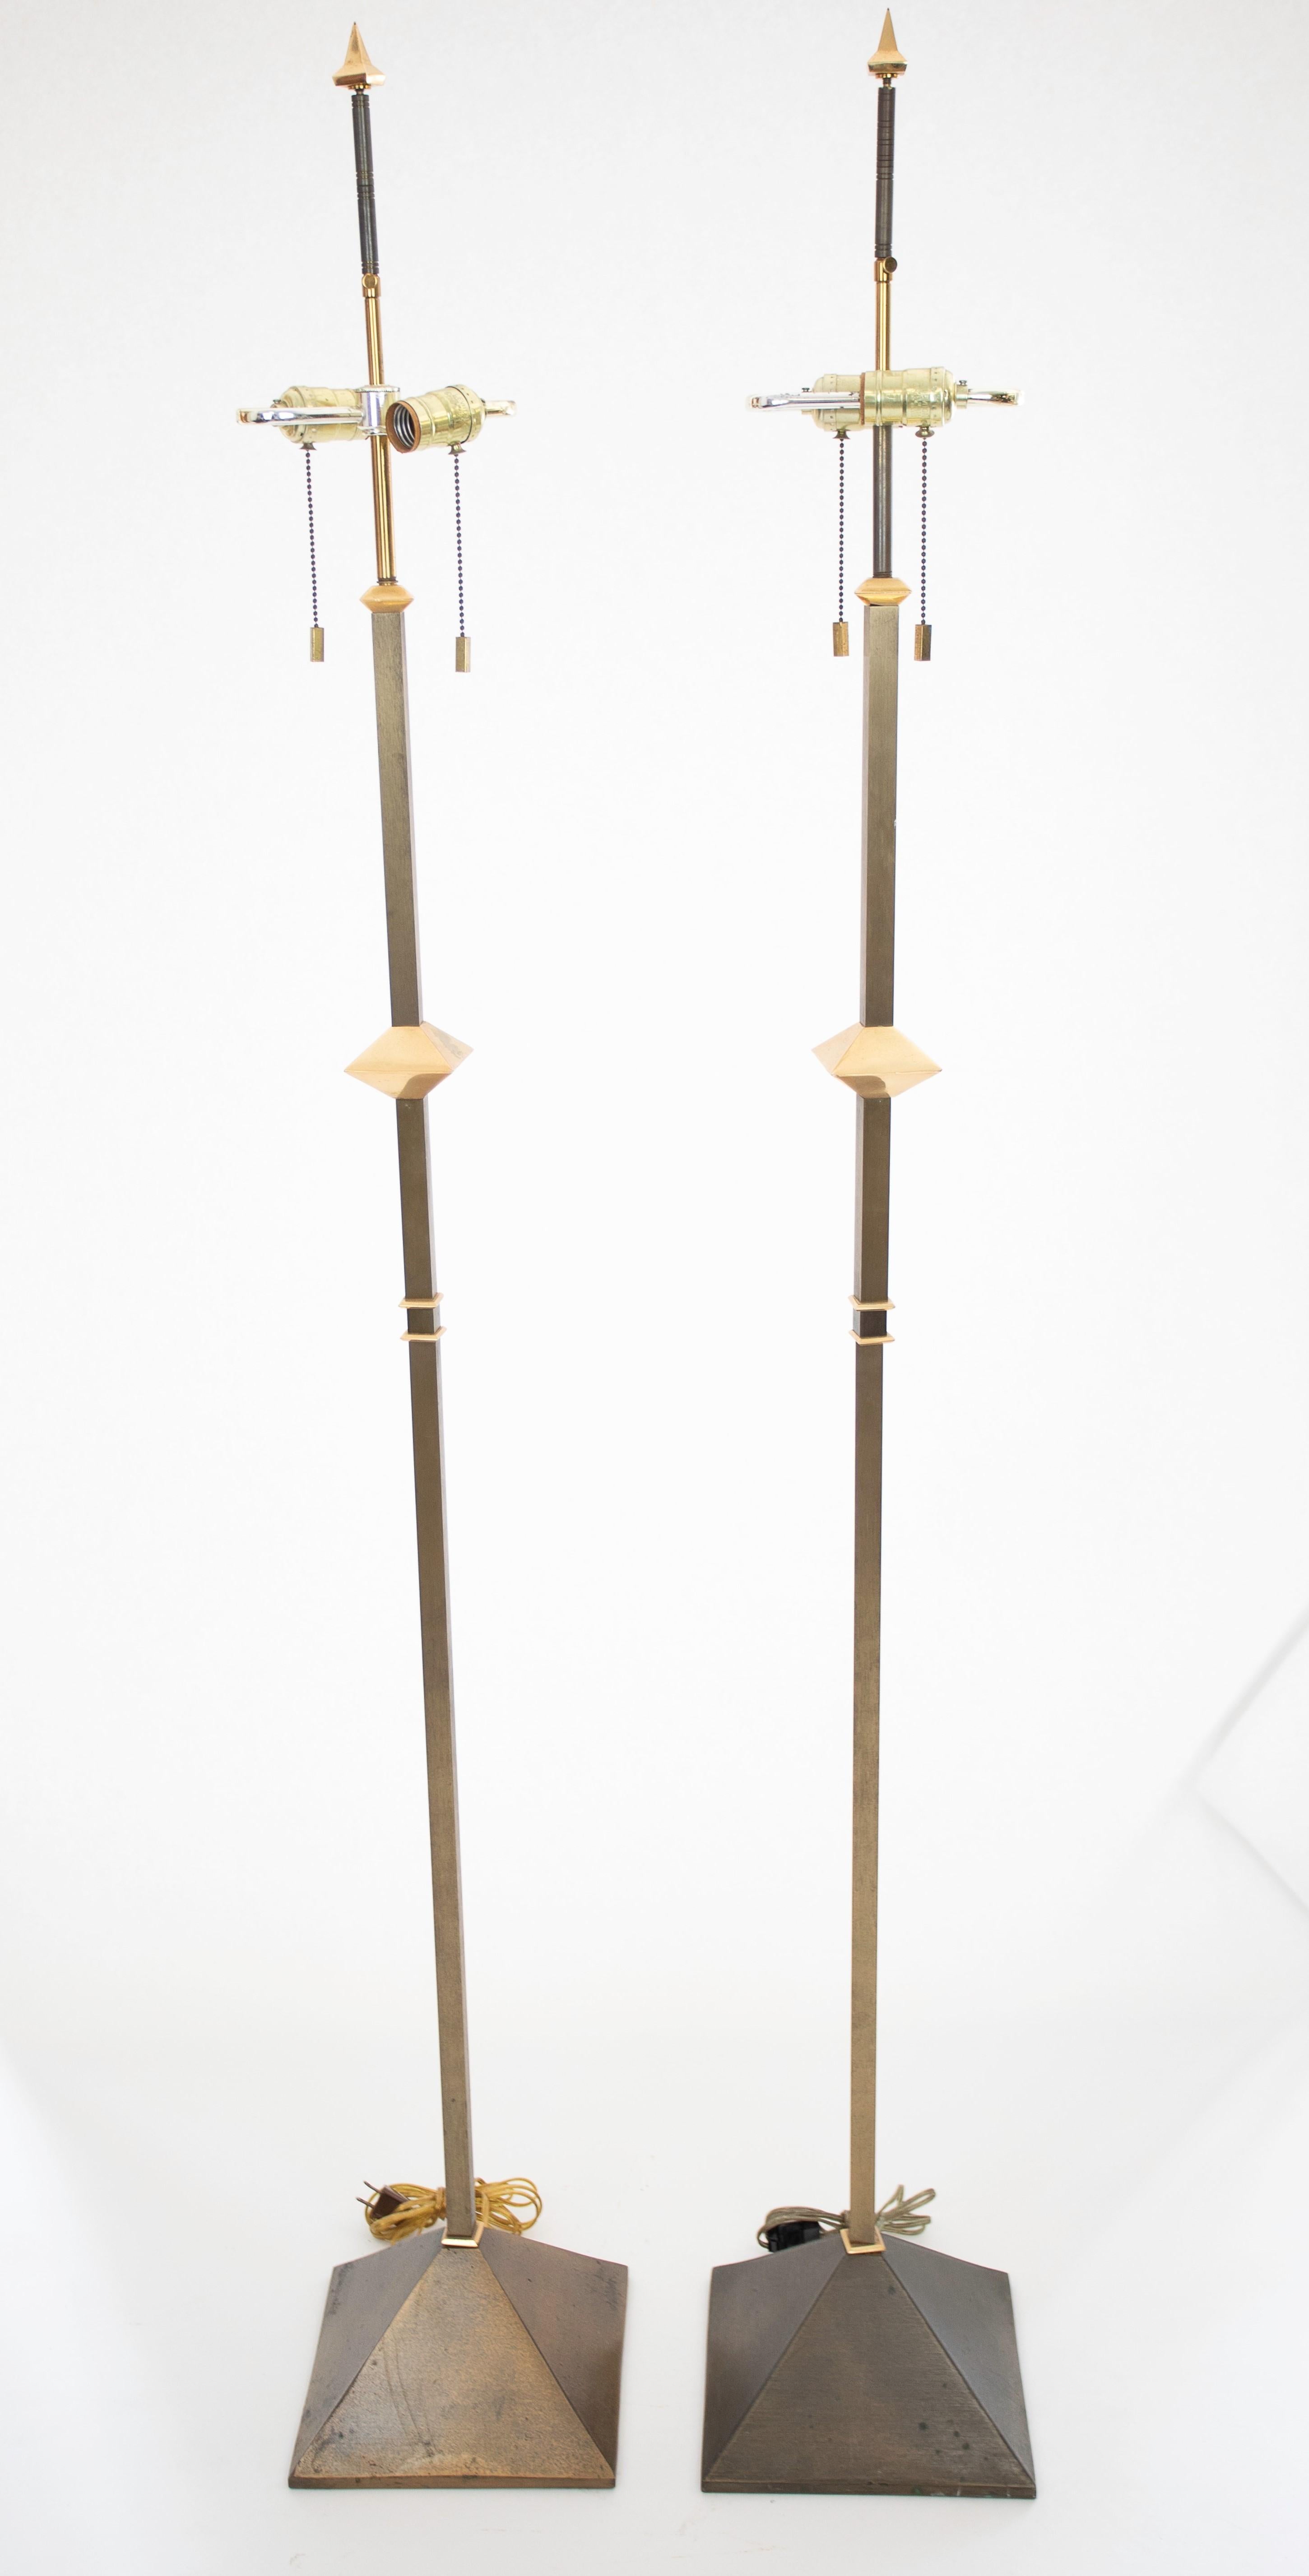 A matched pair of Karl Springer floor lamps
executed in the style of Maison Jansen.